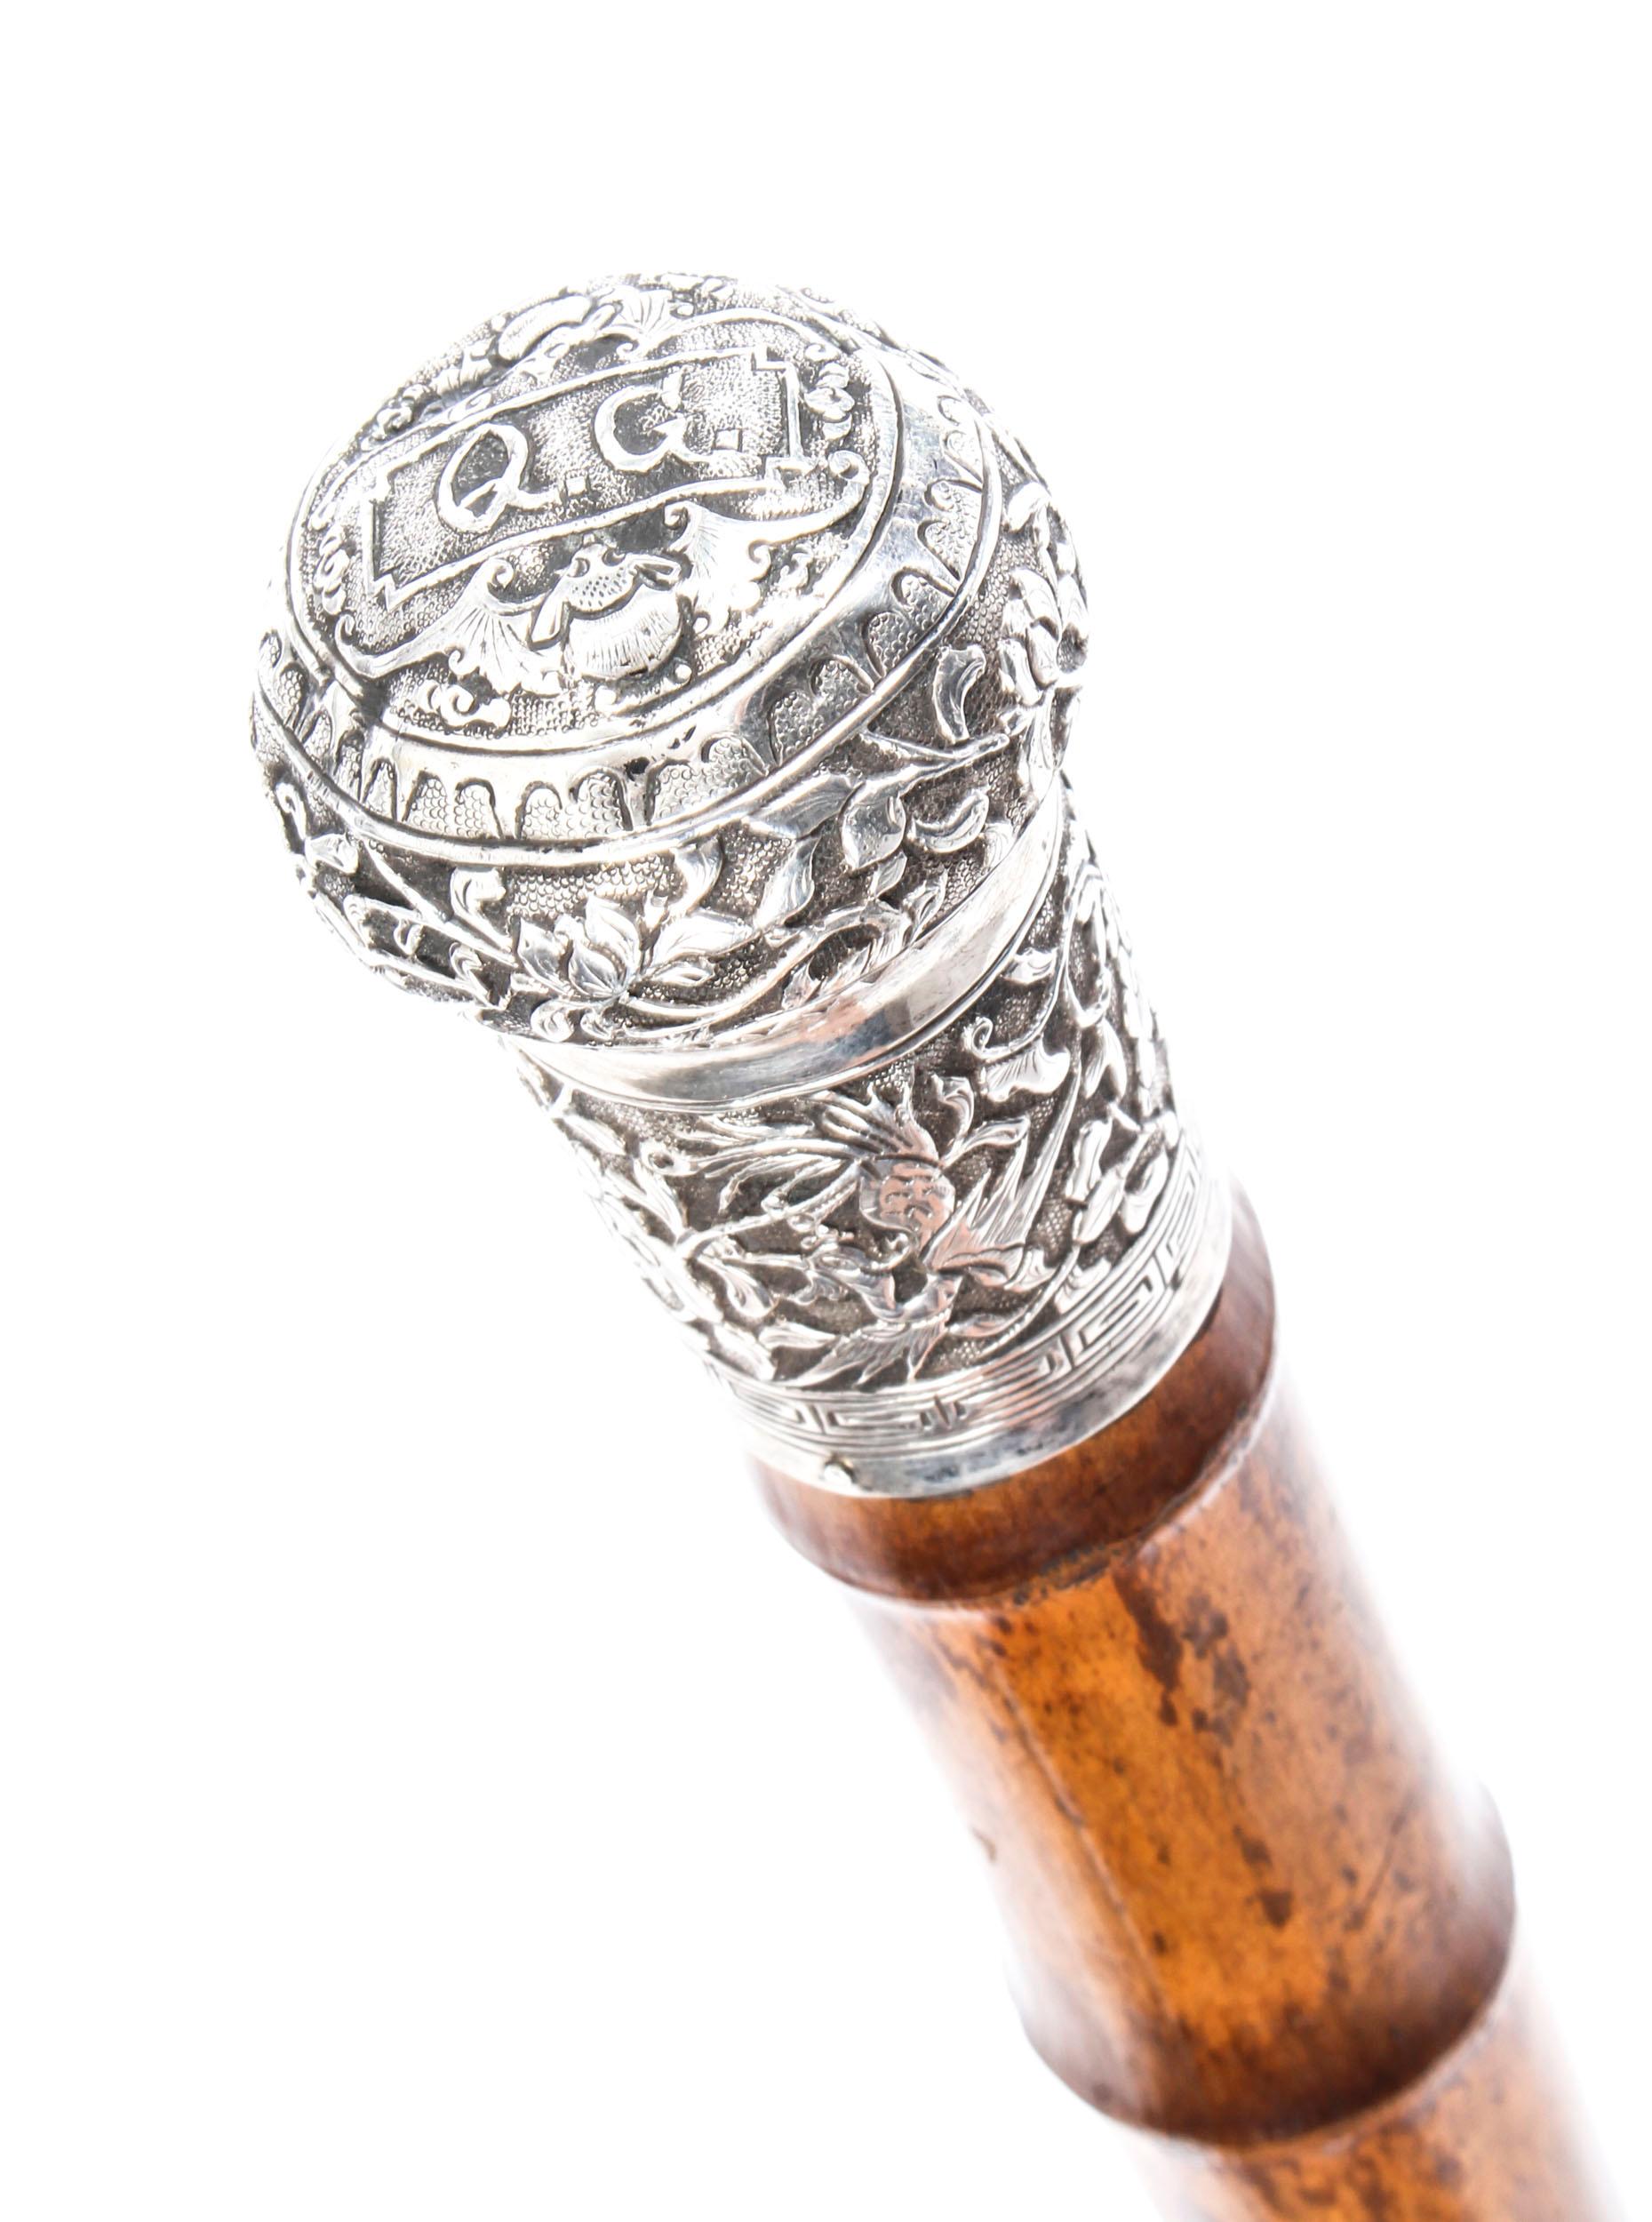 This is a beautiful antique Chinese gentleman's silver pommel walking stick, circa 1880 in date.

This decorative walking cane features an exquisite Chinese silver pommel decorated with exquisitely chased blossoming flowers including lotus and